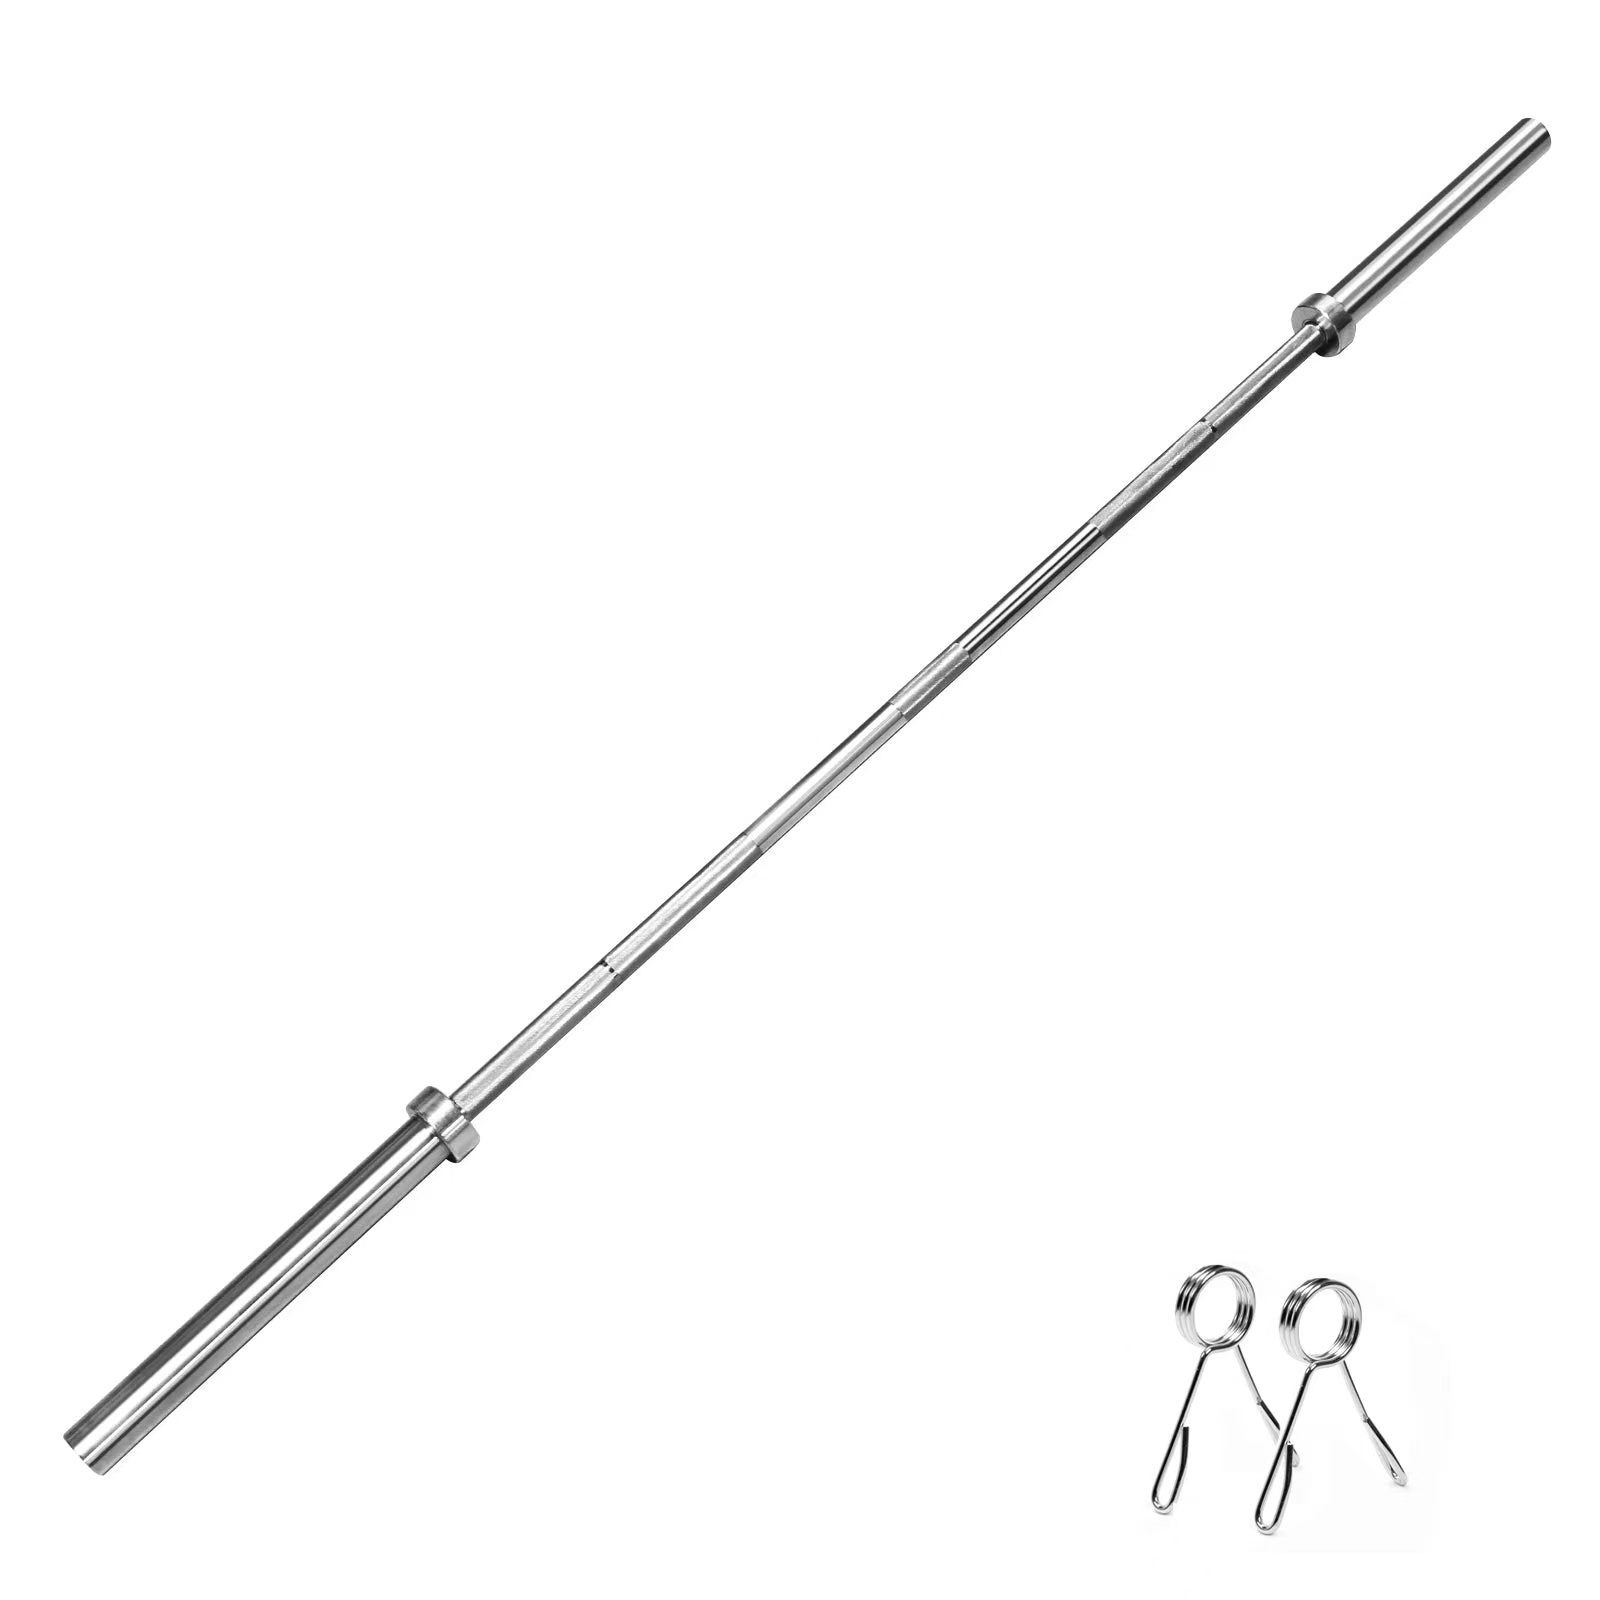 7 FT OLYMPIC WEIGHTLIFTING BARBELL WITH COLLARS, 700 LB RATING